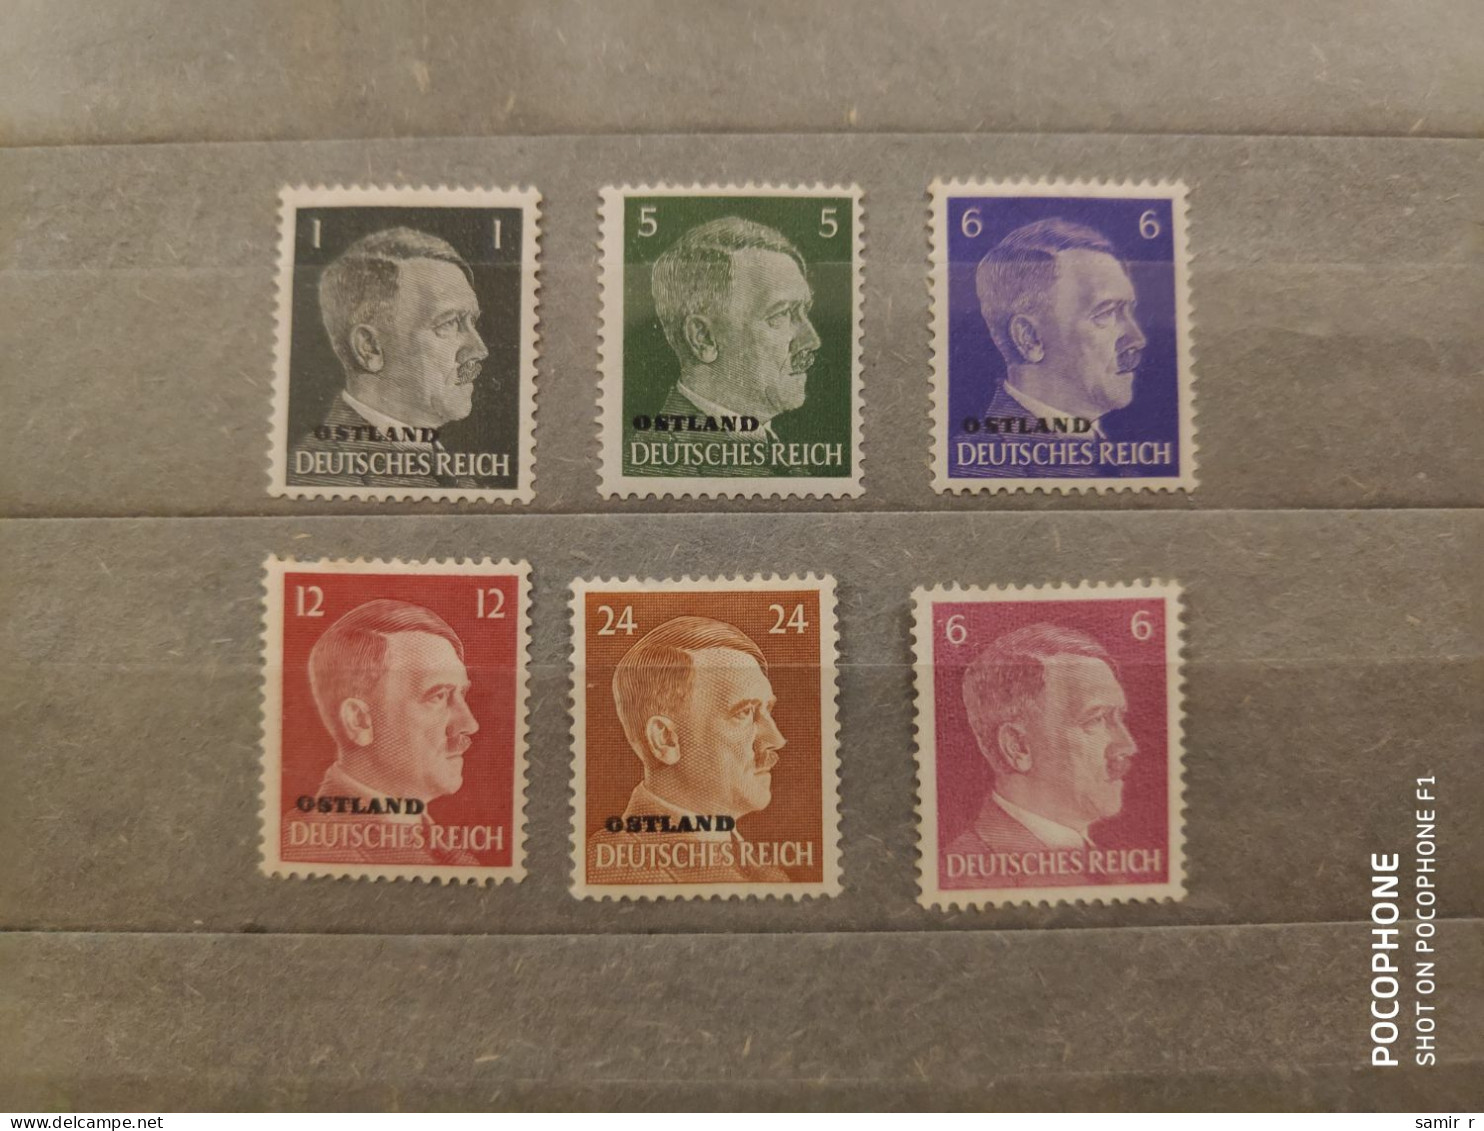 Germany	Reich Hitler (F96) - Unused Stamps